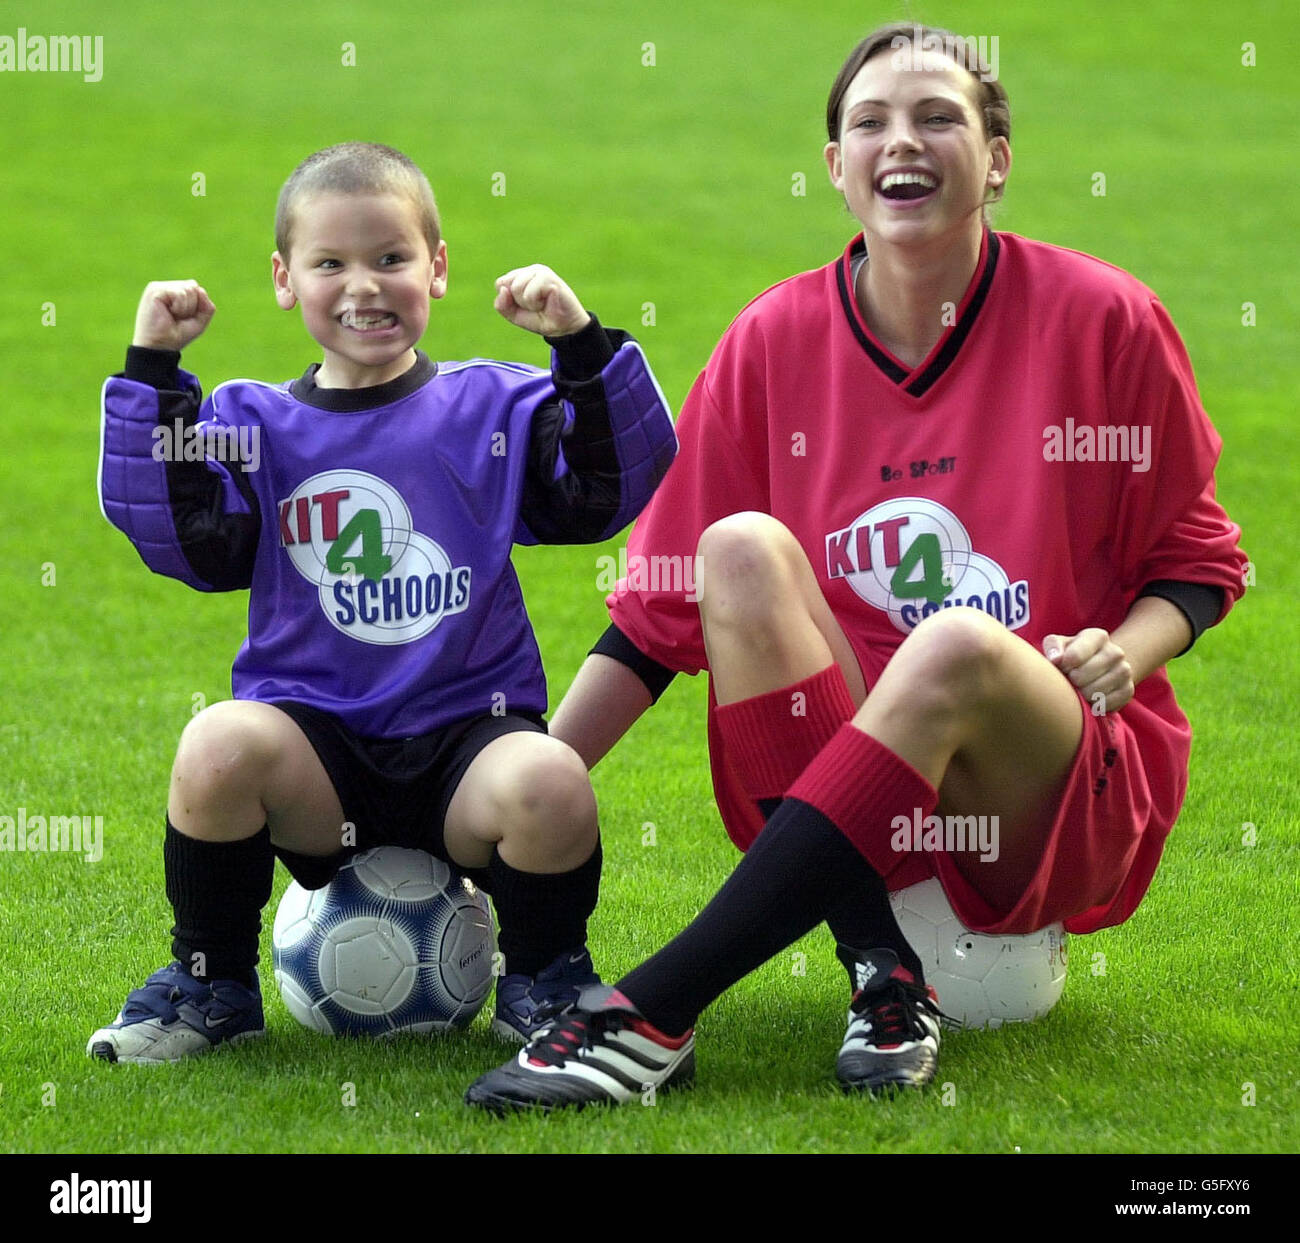 Five-year-old Jake Lunn from Ashford, Kent, with model Kate Groombridge during the launch of Kit 4 Schools at Tottenham's White Hart Lane ground in London. * .... Kit4Schools is a new campaign that aims to offer children across the country the chance of having new soccer kits donated to their schools for free. Stock Photo